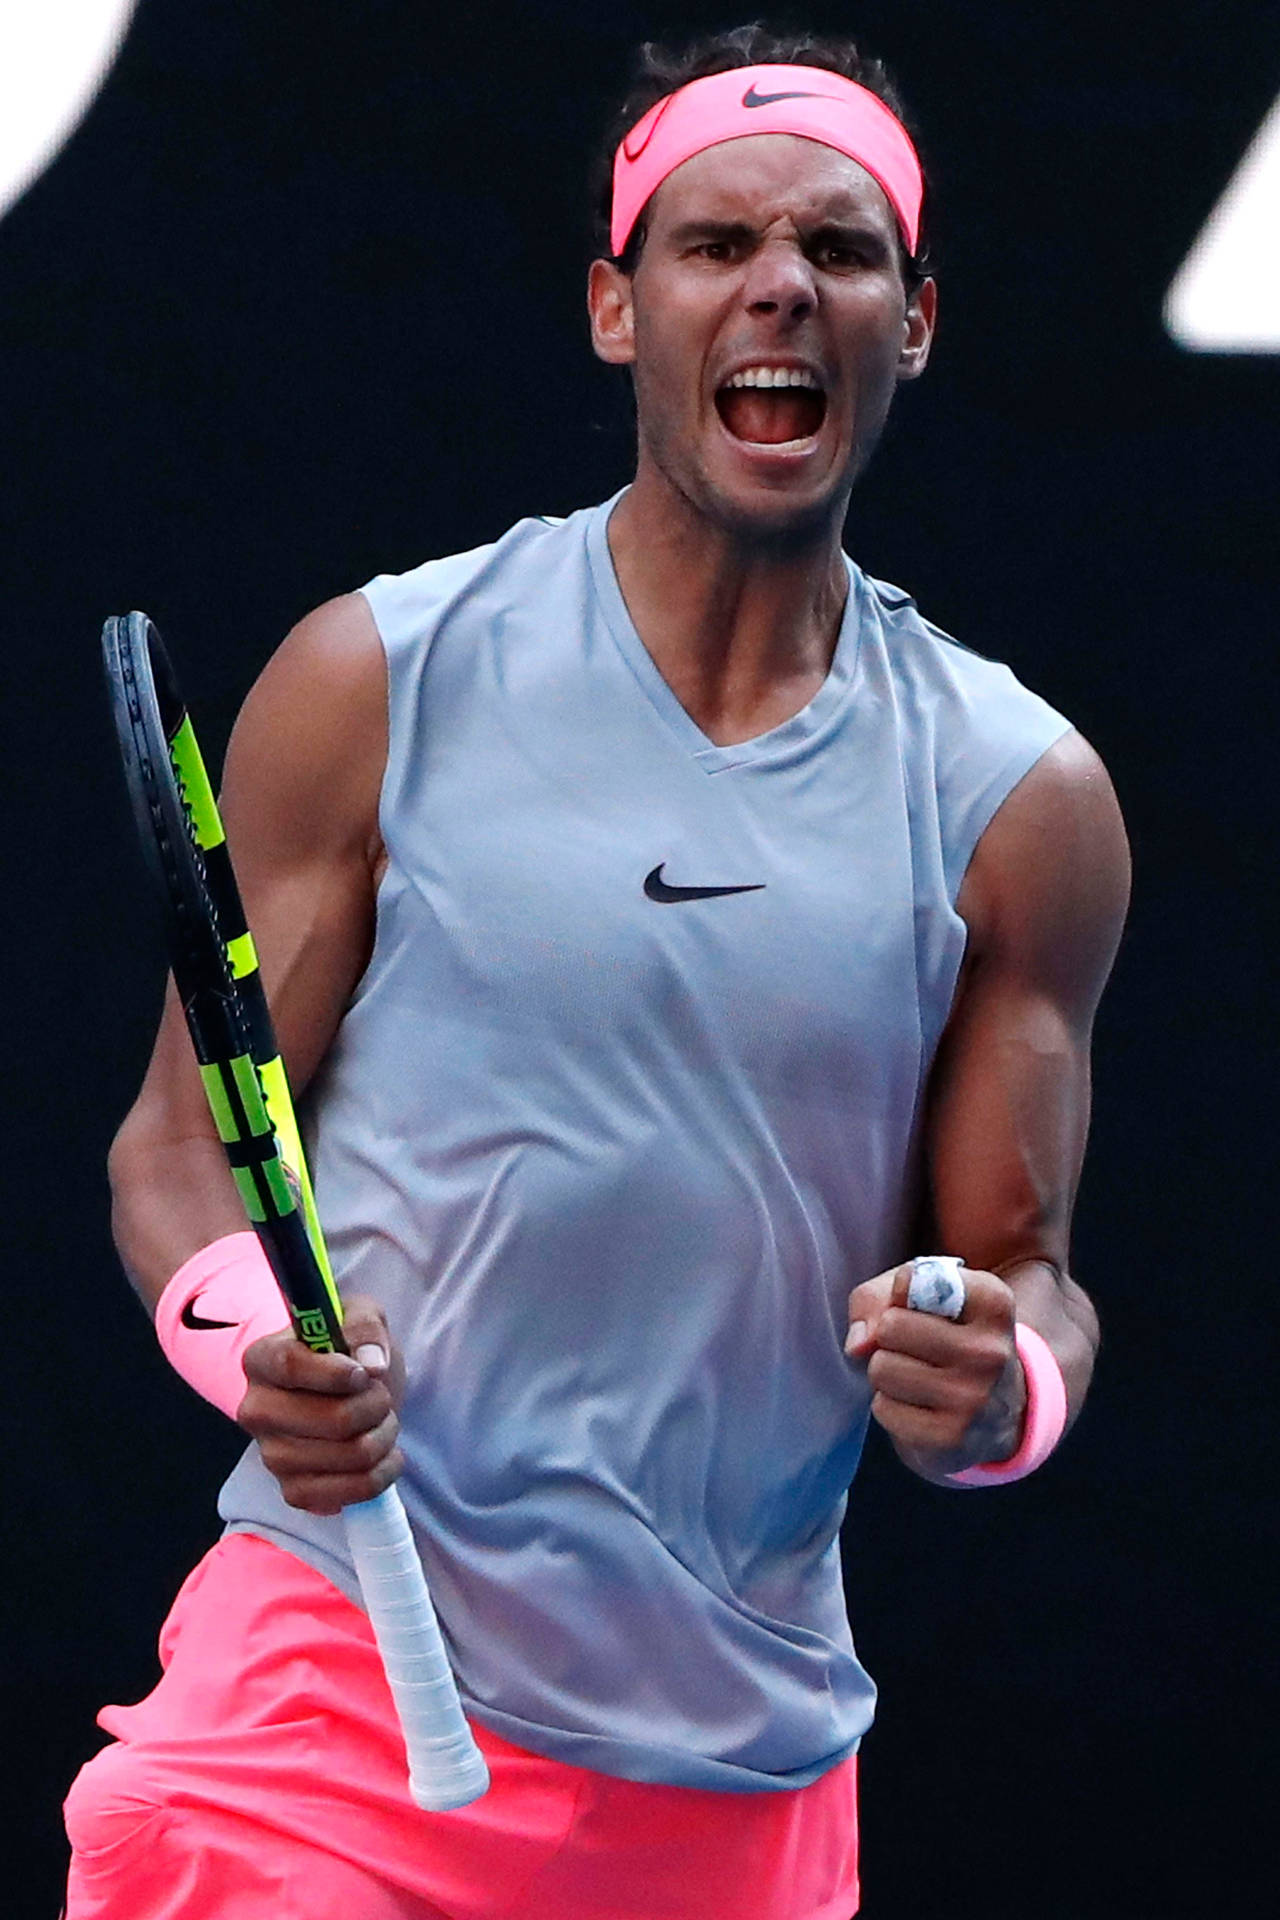 Rafael Nadal Hyped-up Expression